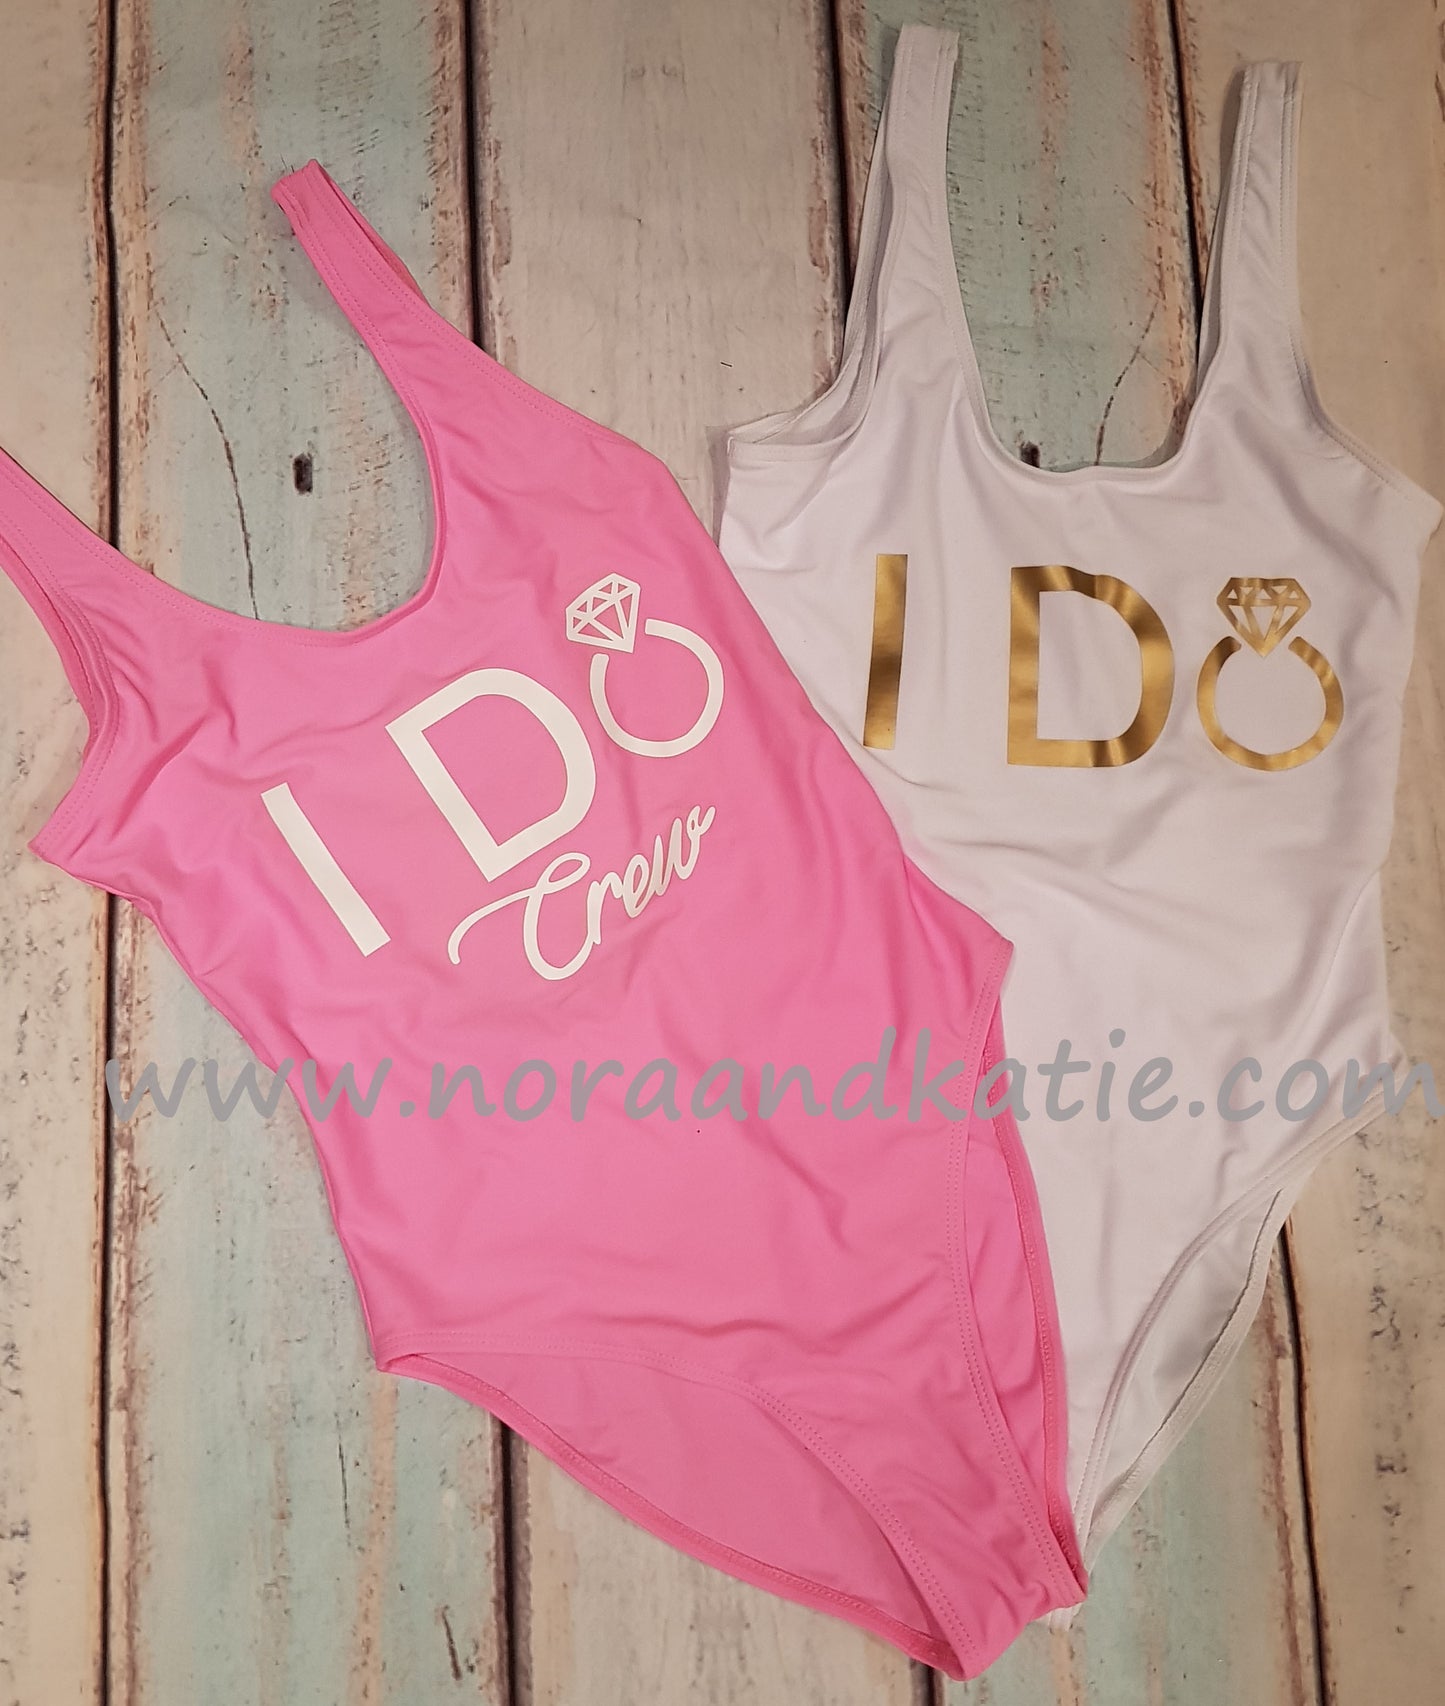 Pink "I Do Crew"  All in one swimsuit